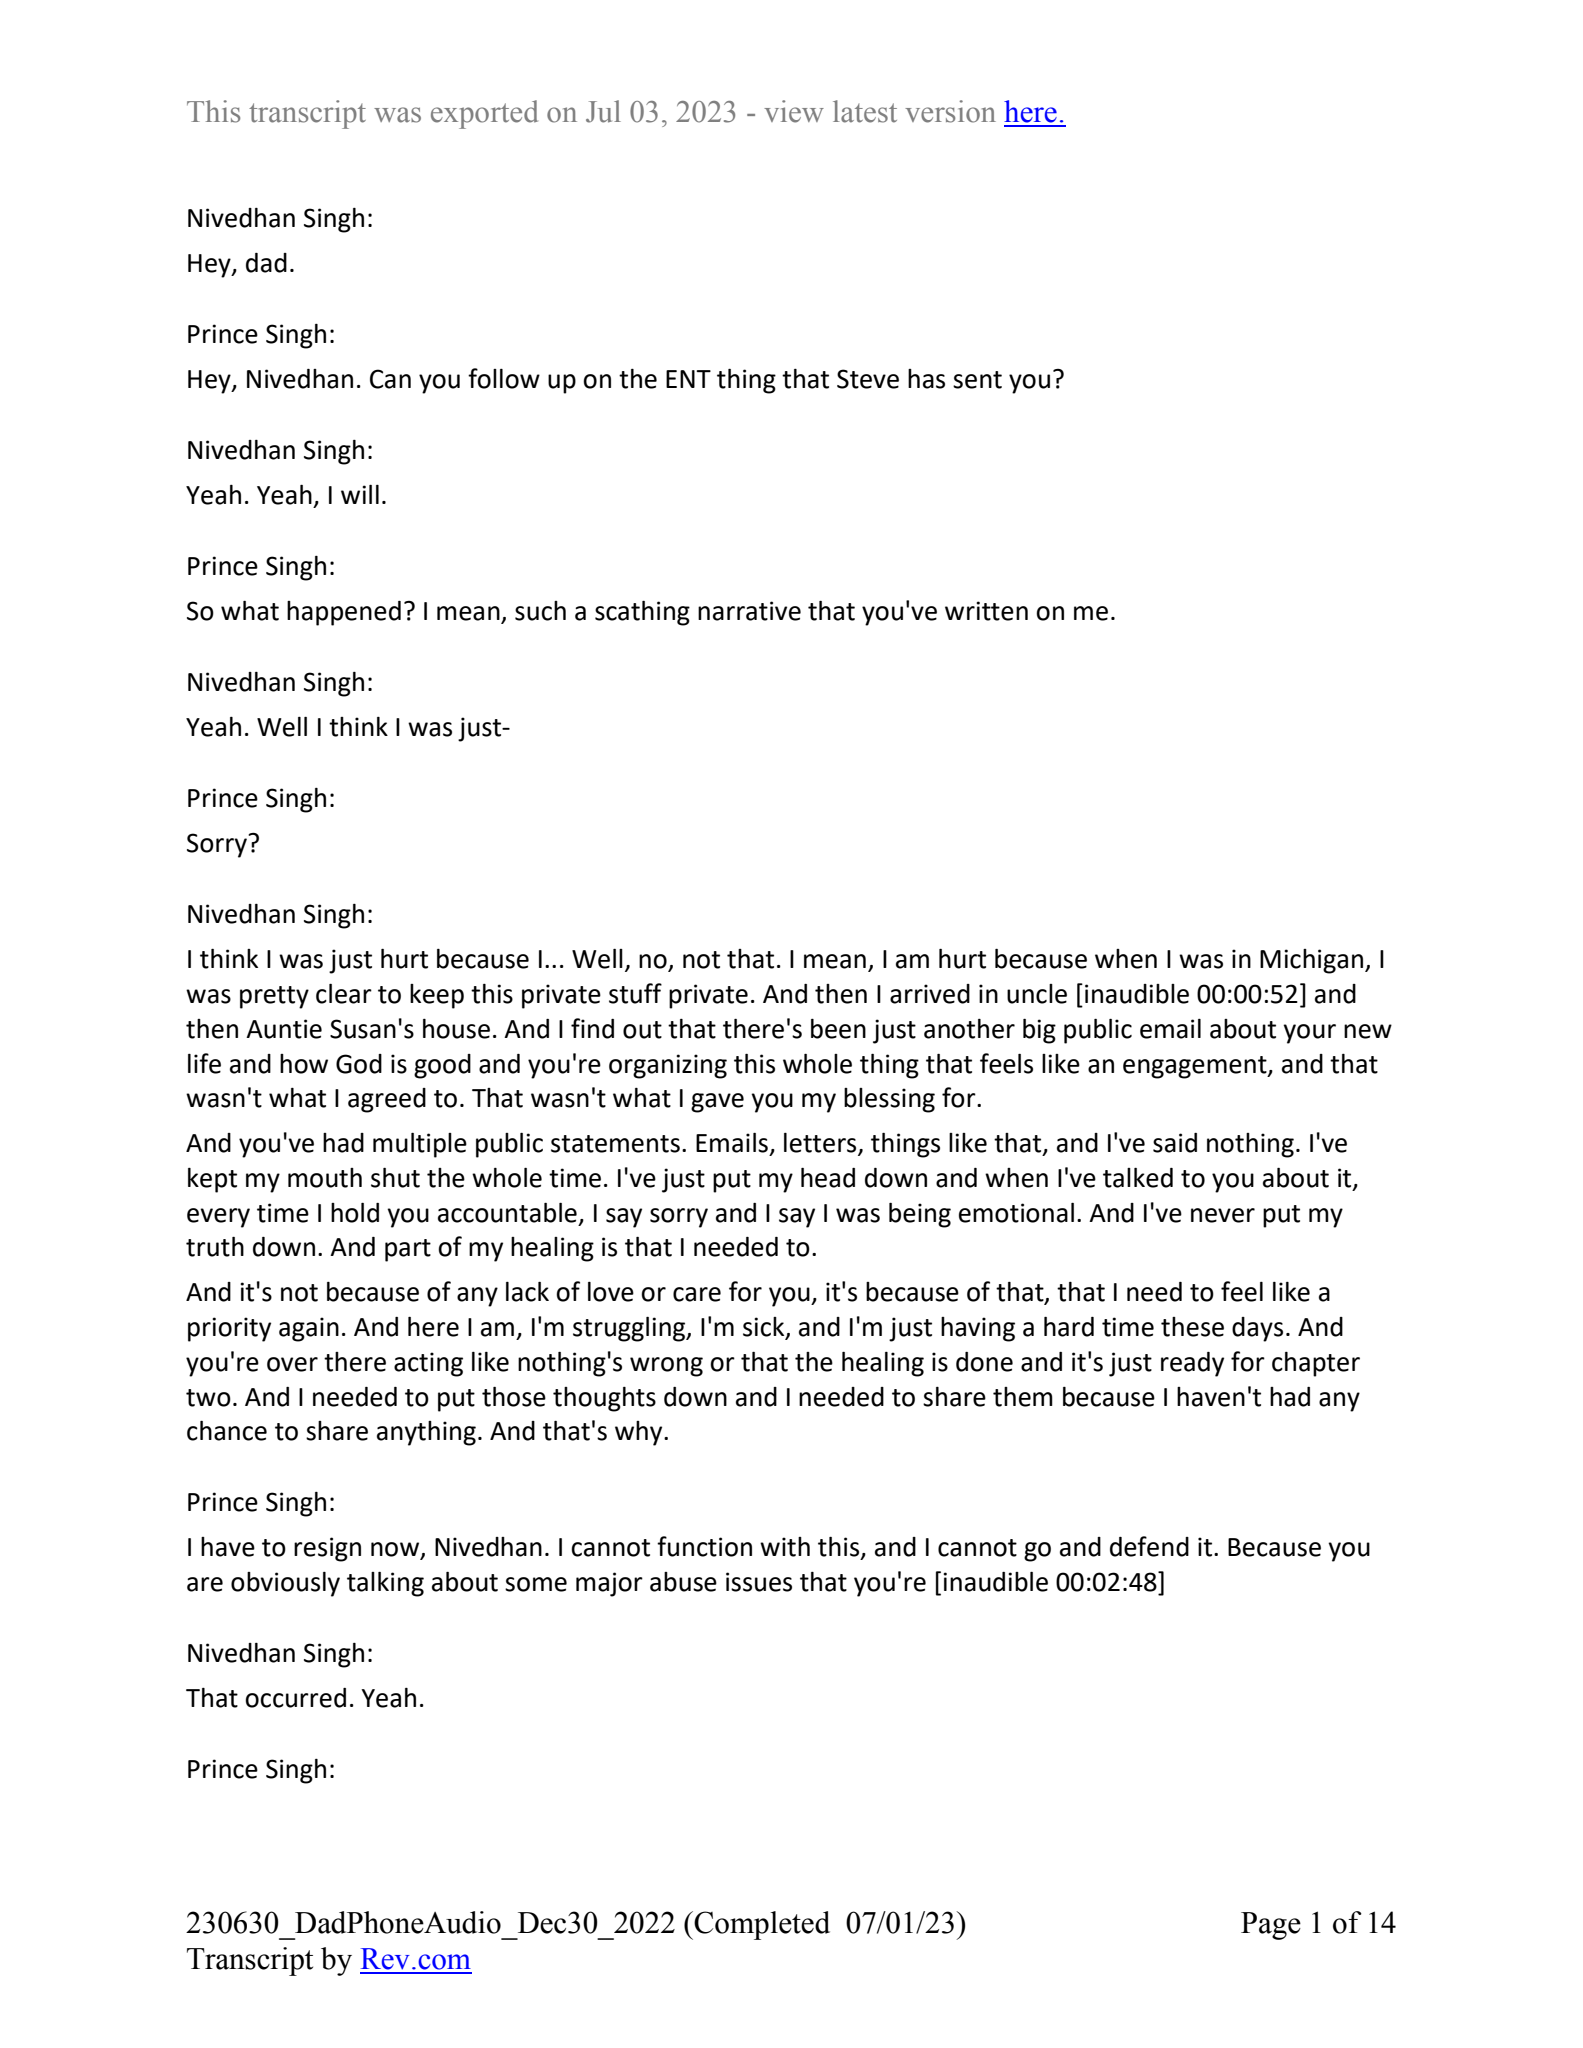 December 30th, 2022 phone call transcript - Page 1